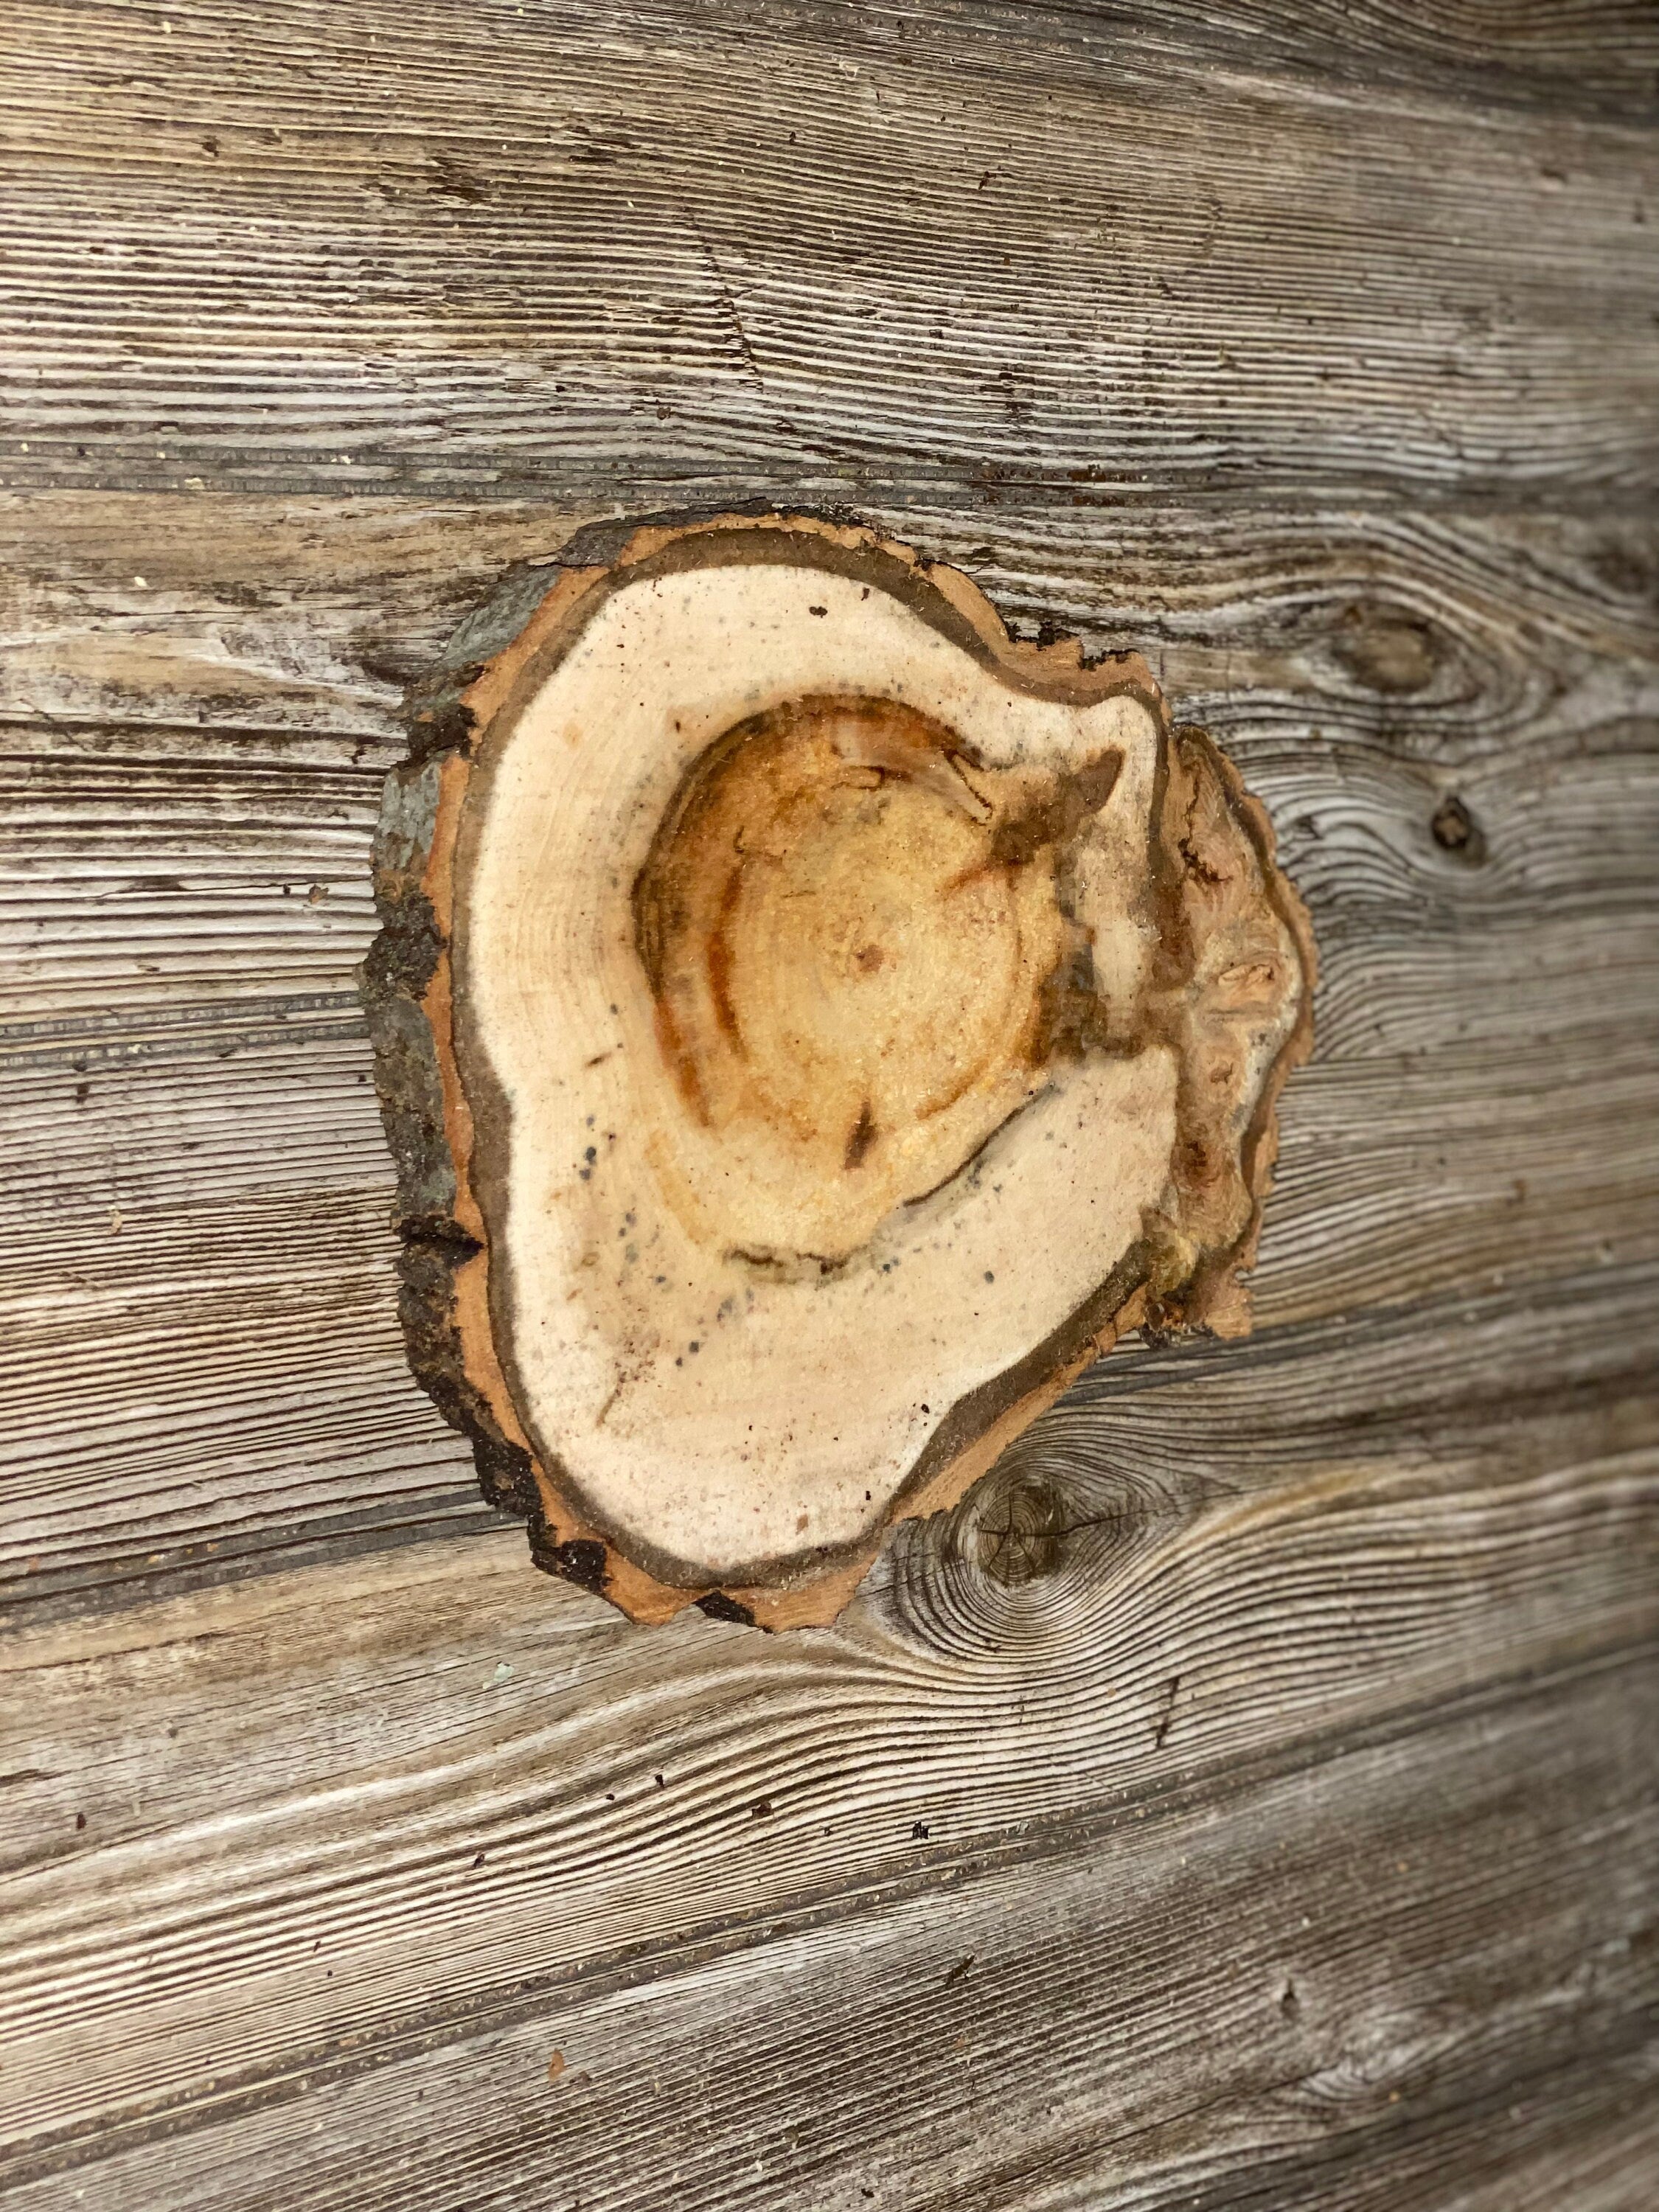 Aspen Burl Slice, Approximately 10 Inches Long by 8.5 Inches Wide and 3/4 Inches Thick